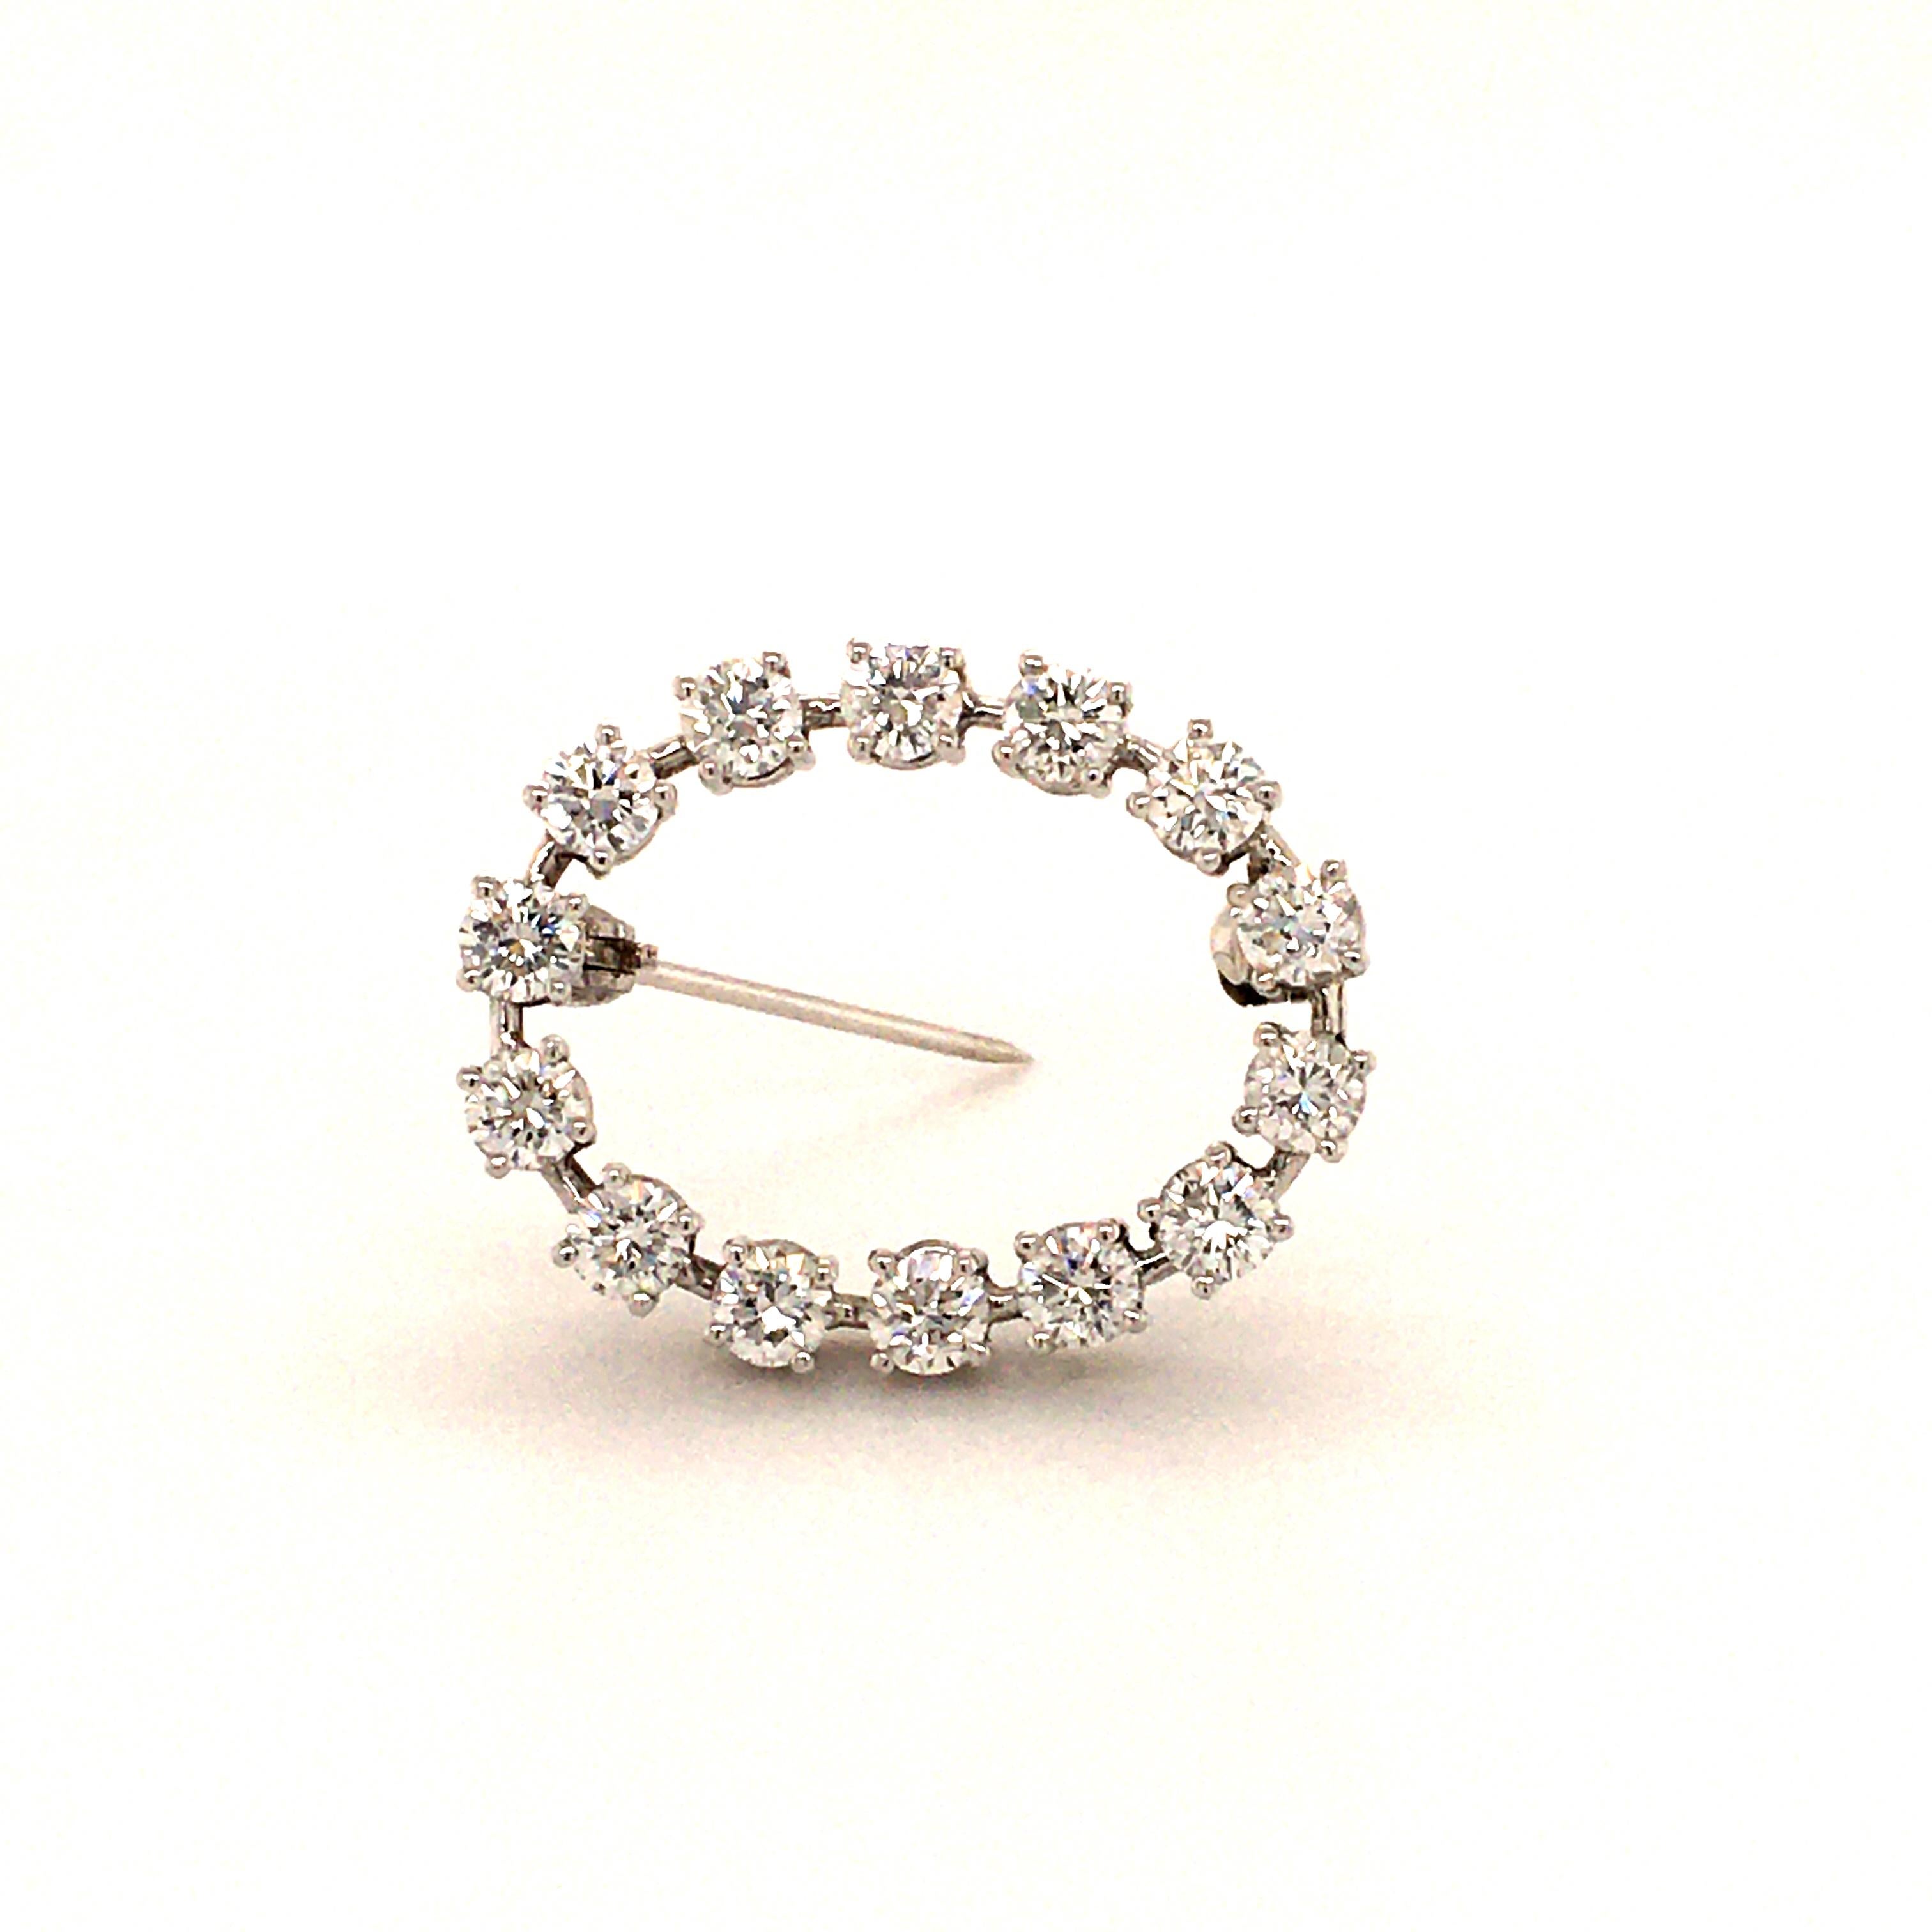 This 18kt White Gold Brooch lines up 14 Diamonds, together 2.00 ct (Quality: G/H-vs)
The clean design allowes you to wear this brooch on every occation, day and night.
The securityclasp helps you to protect your precious item.

Measurements: 2.50 x